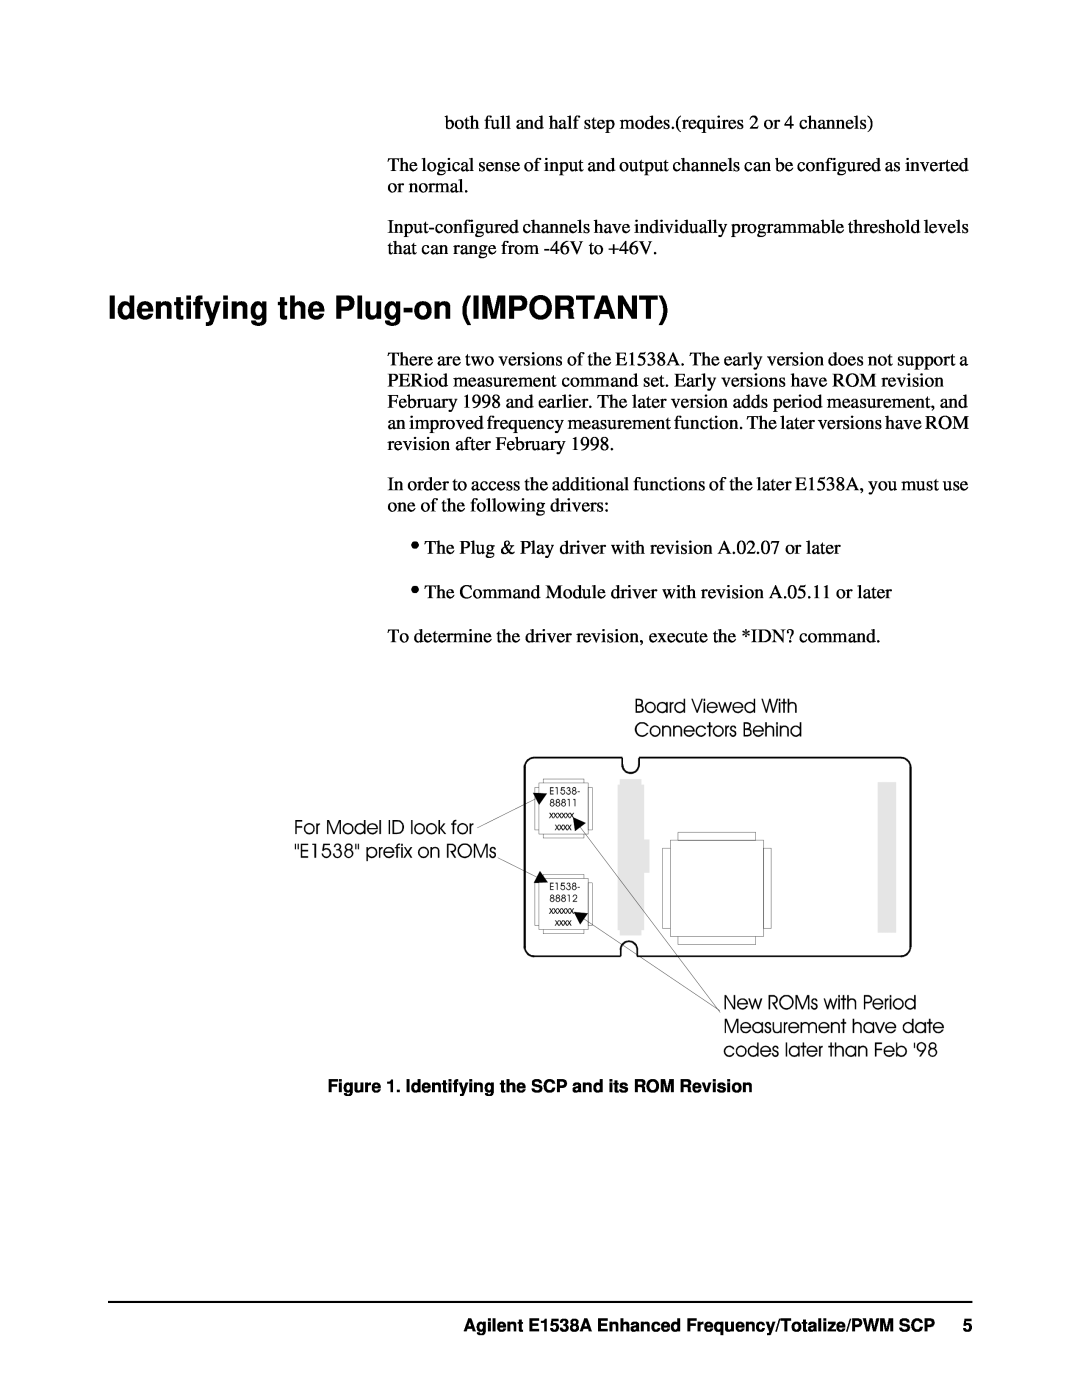 VXI VT1538A user manual Identifying the Plug-on IMPORTANT 